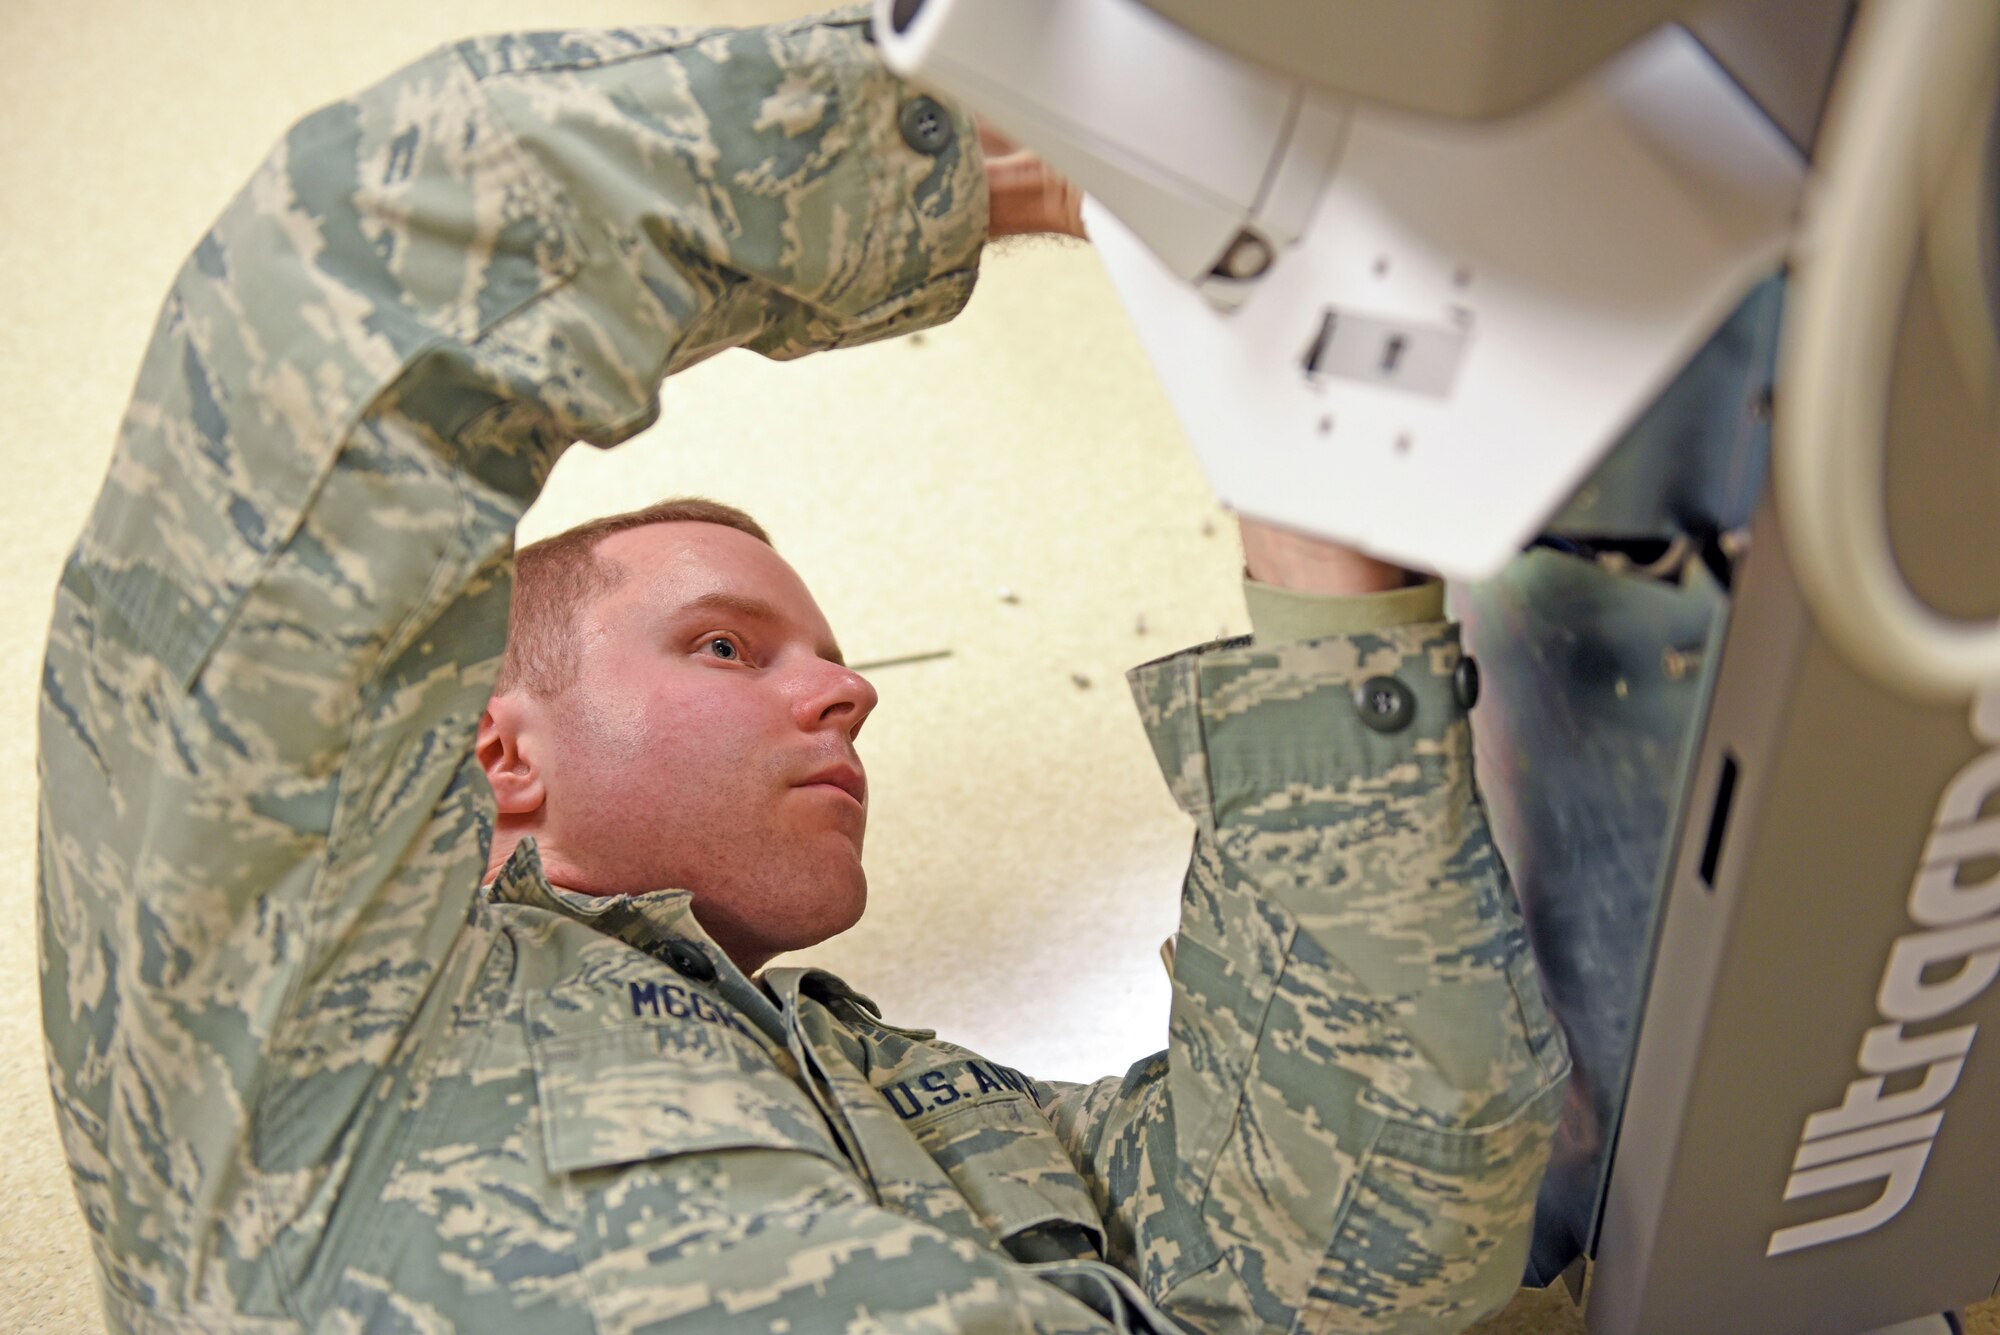 Airman 1st Class Jason McGhee, 375th Medical Support Squadron biomedical equipment technician, repairs a dermatologic laser at the 375th Medical group Clinic, Scott Air Force Base, Ill. Jan. 11, 2019. Without the 375th Medical Equipment Repair Center being at Scott, the base would have to rely on contractors or other bases to maintain the equipment, which could lengthen the process by weeks. (Air Force photo by Airman 1st Class Chad Gorecki)